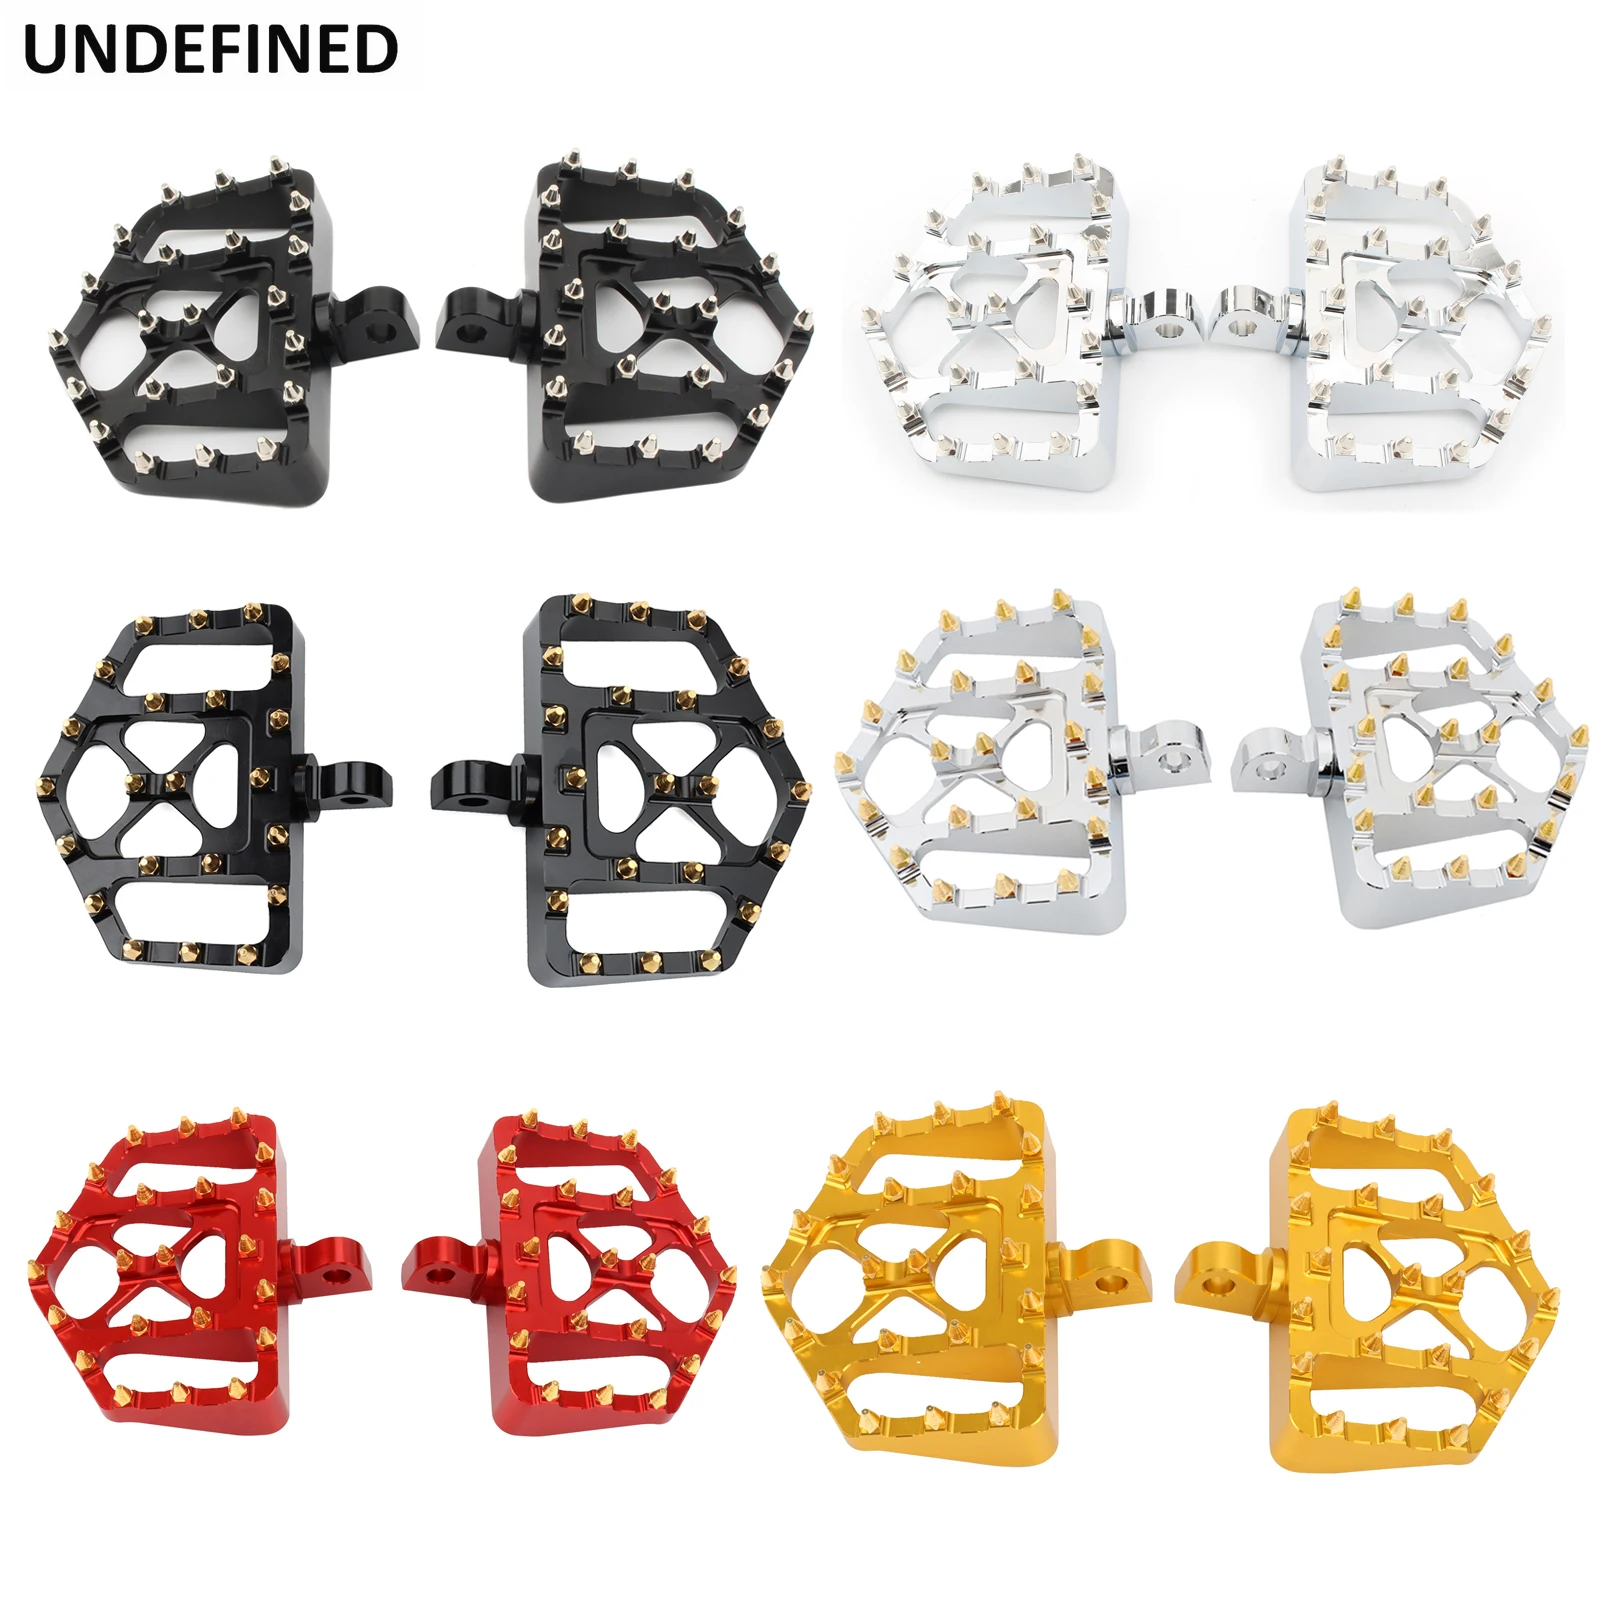 

Motorcycle Wide Foot Pegs MX Style Floorboard Footrests Pedals For Harley Sportster XL 1200 883 Dyna FXDF Softail Fatboy Slim